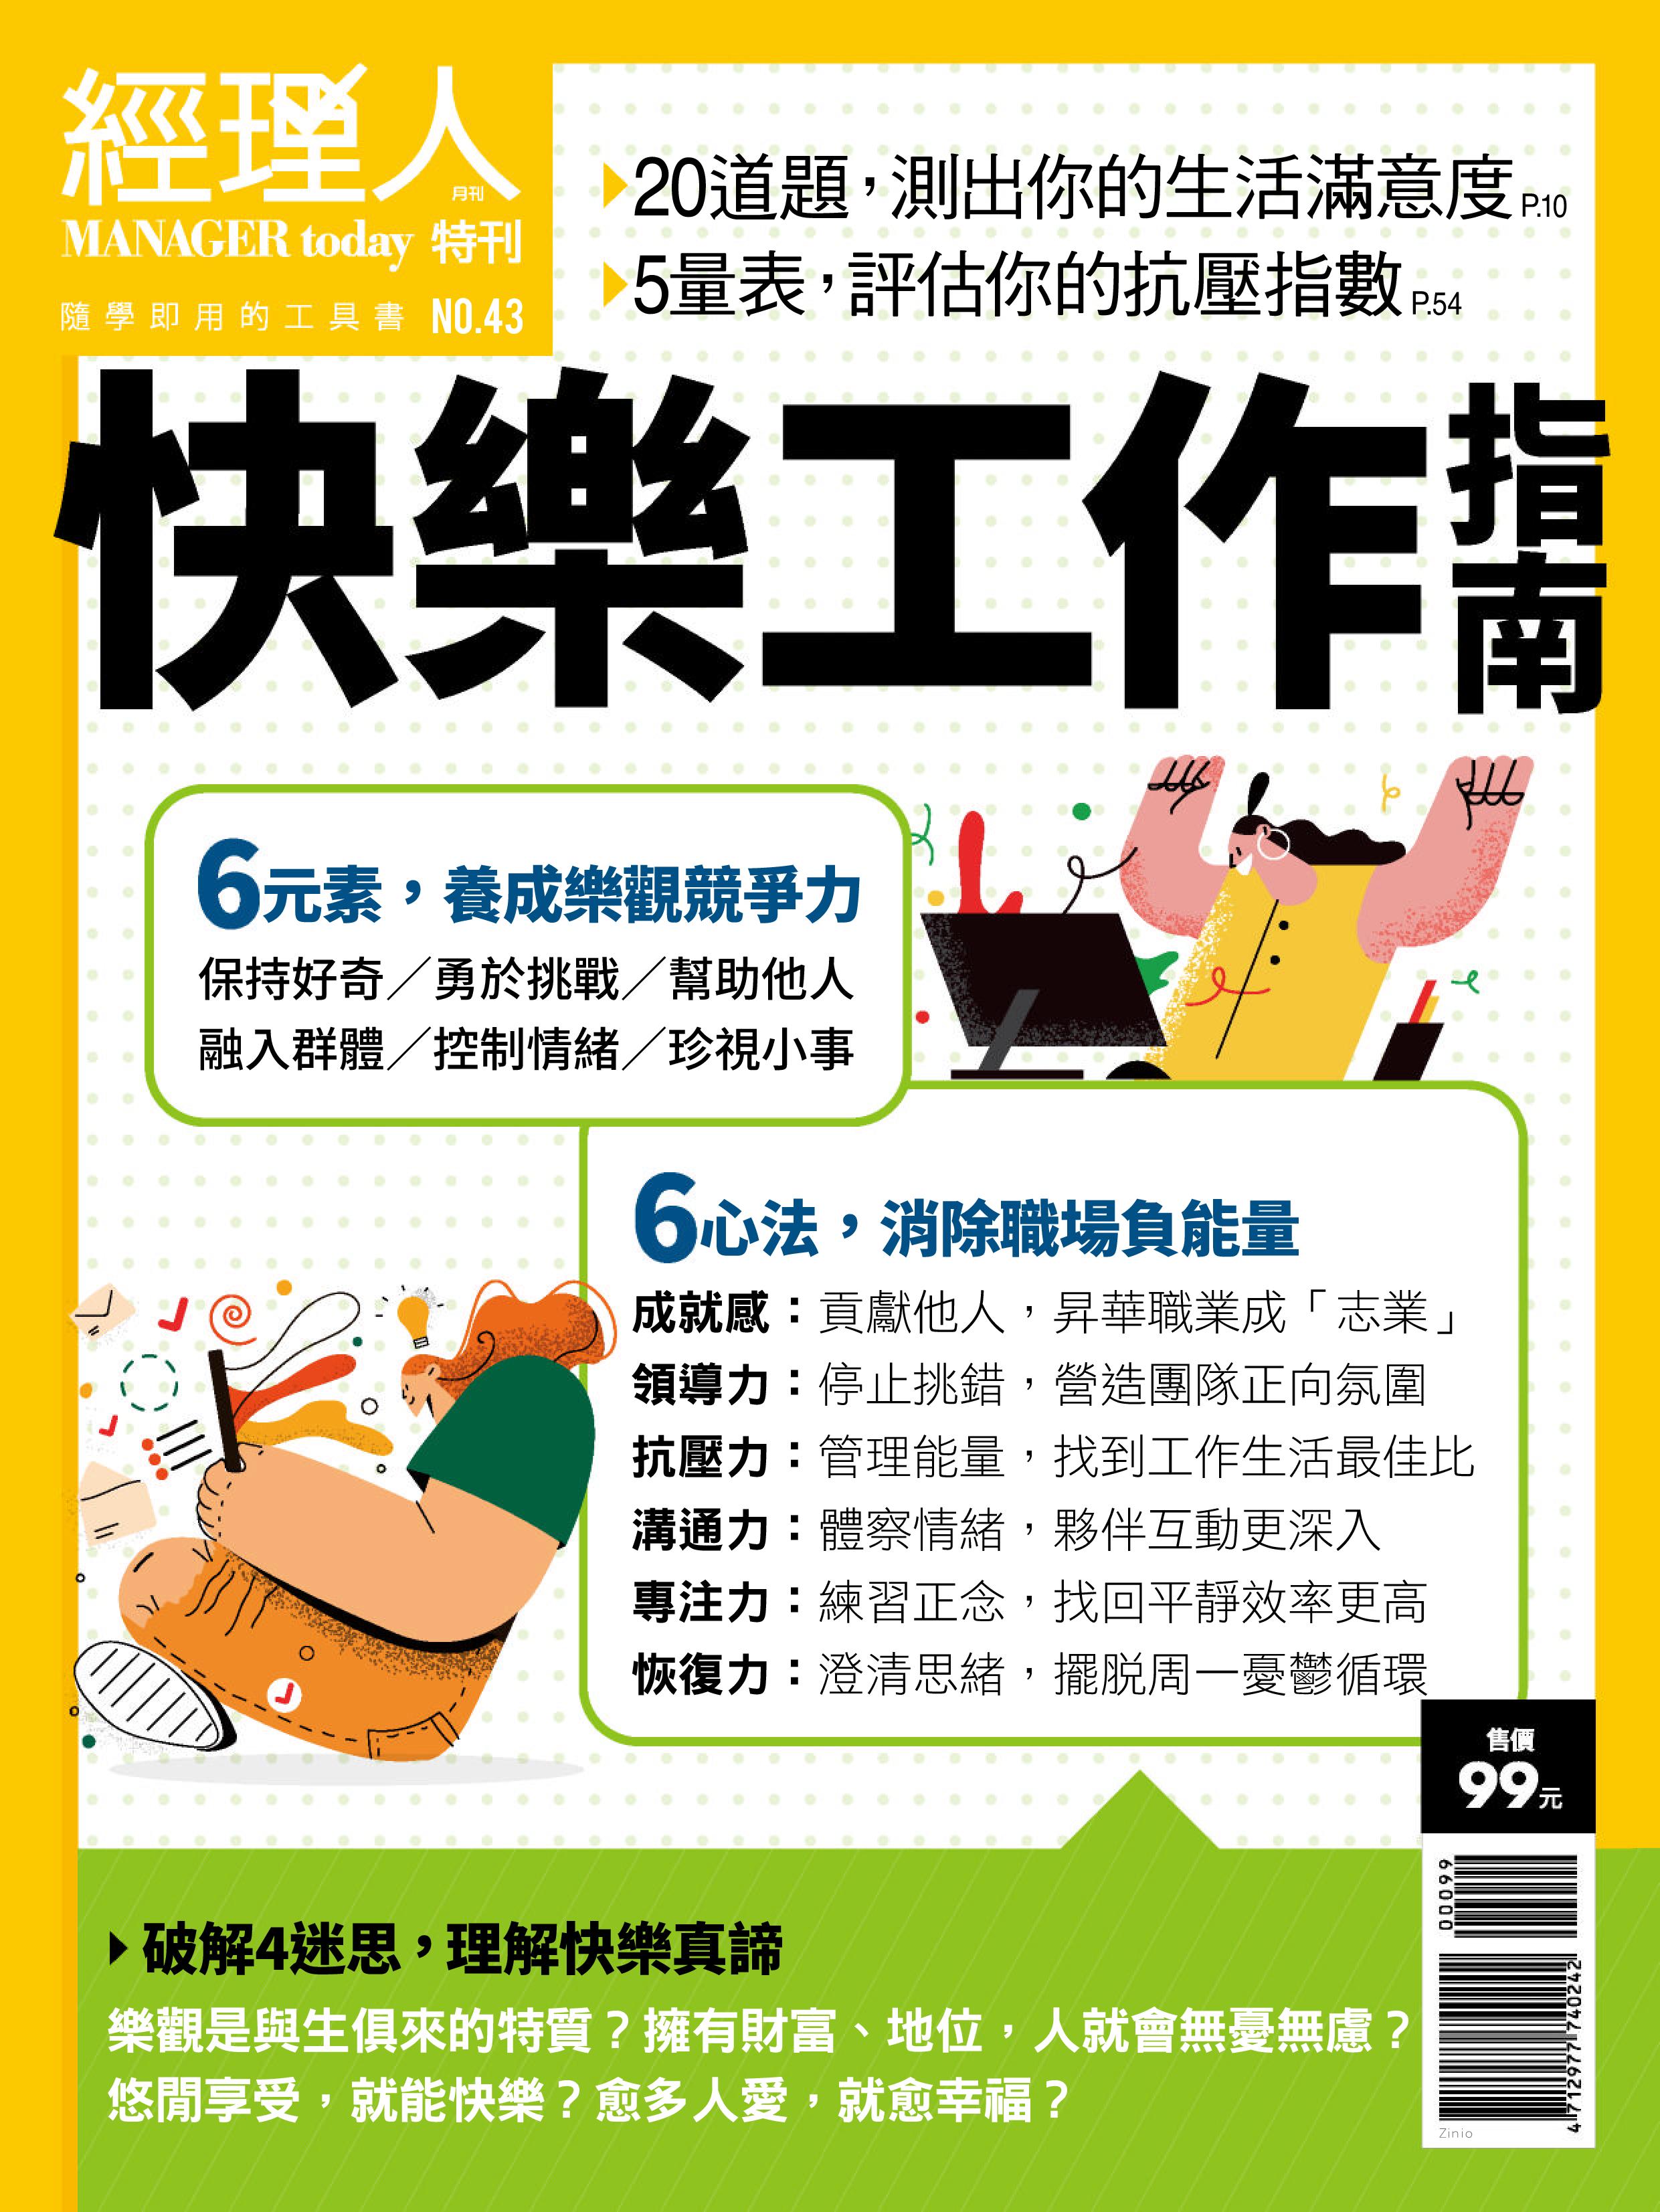 Manager Today Special Issue 經理人. 主題特刊 - 十月 07, 2021